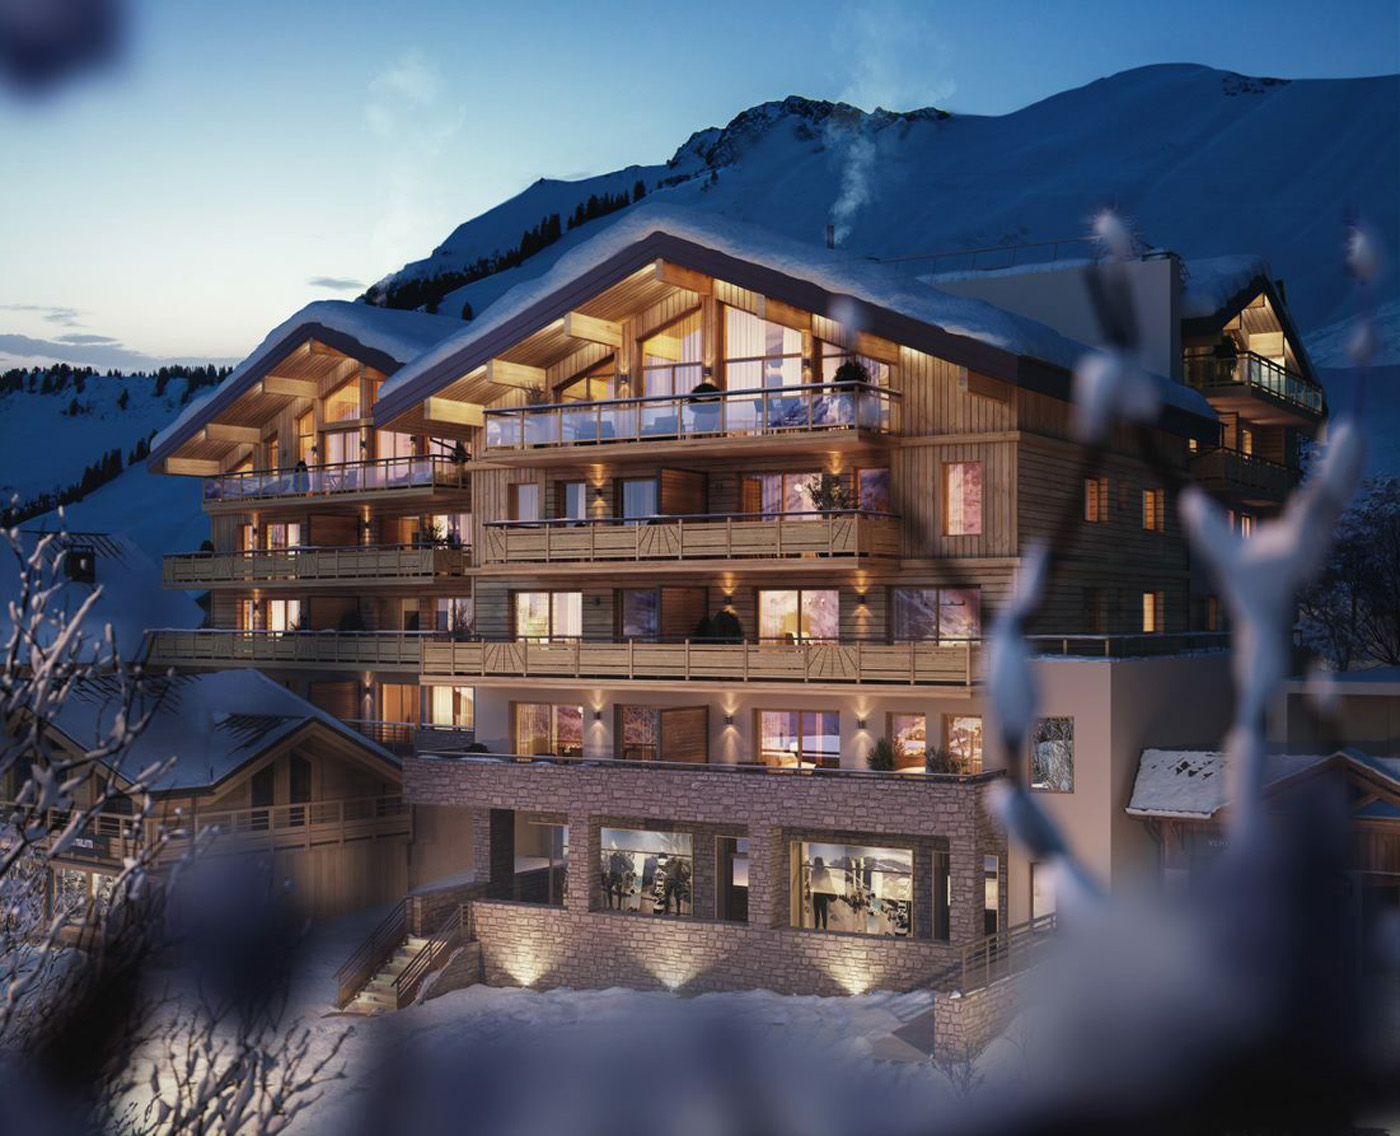 4 bed Apartment For Sale in Alpe d'Huez Grand Domaine, French Alps